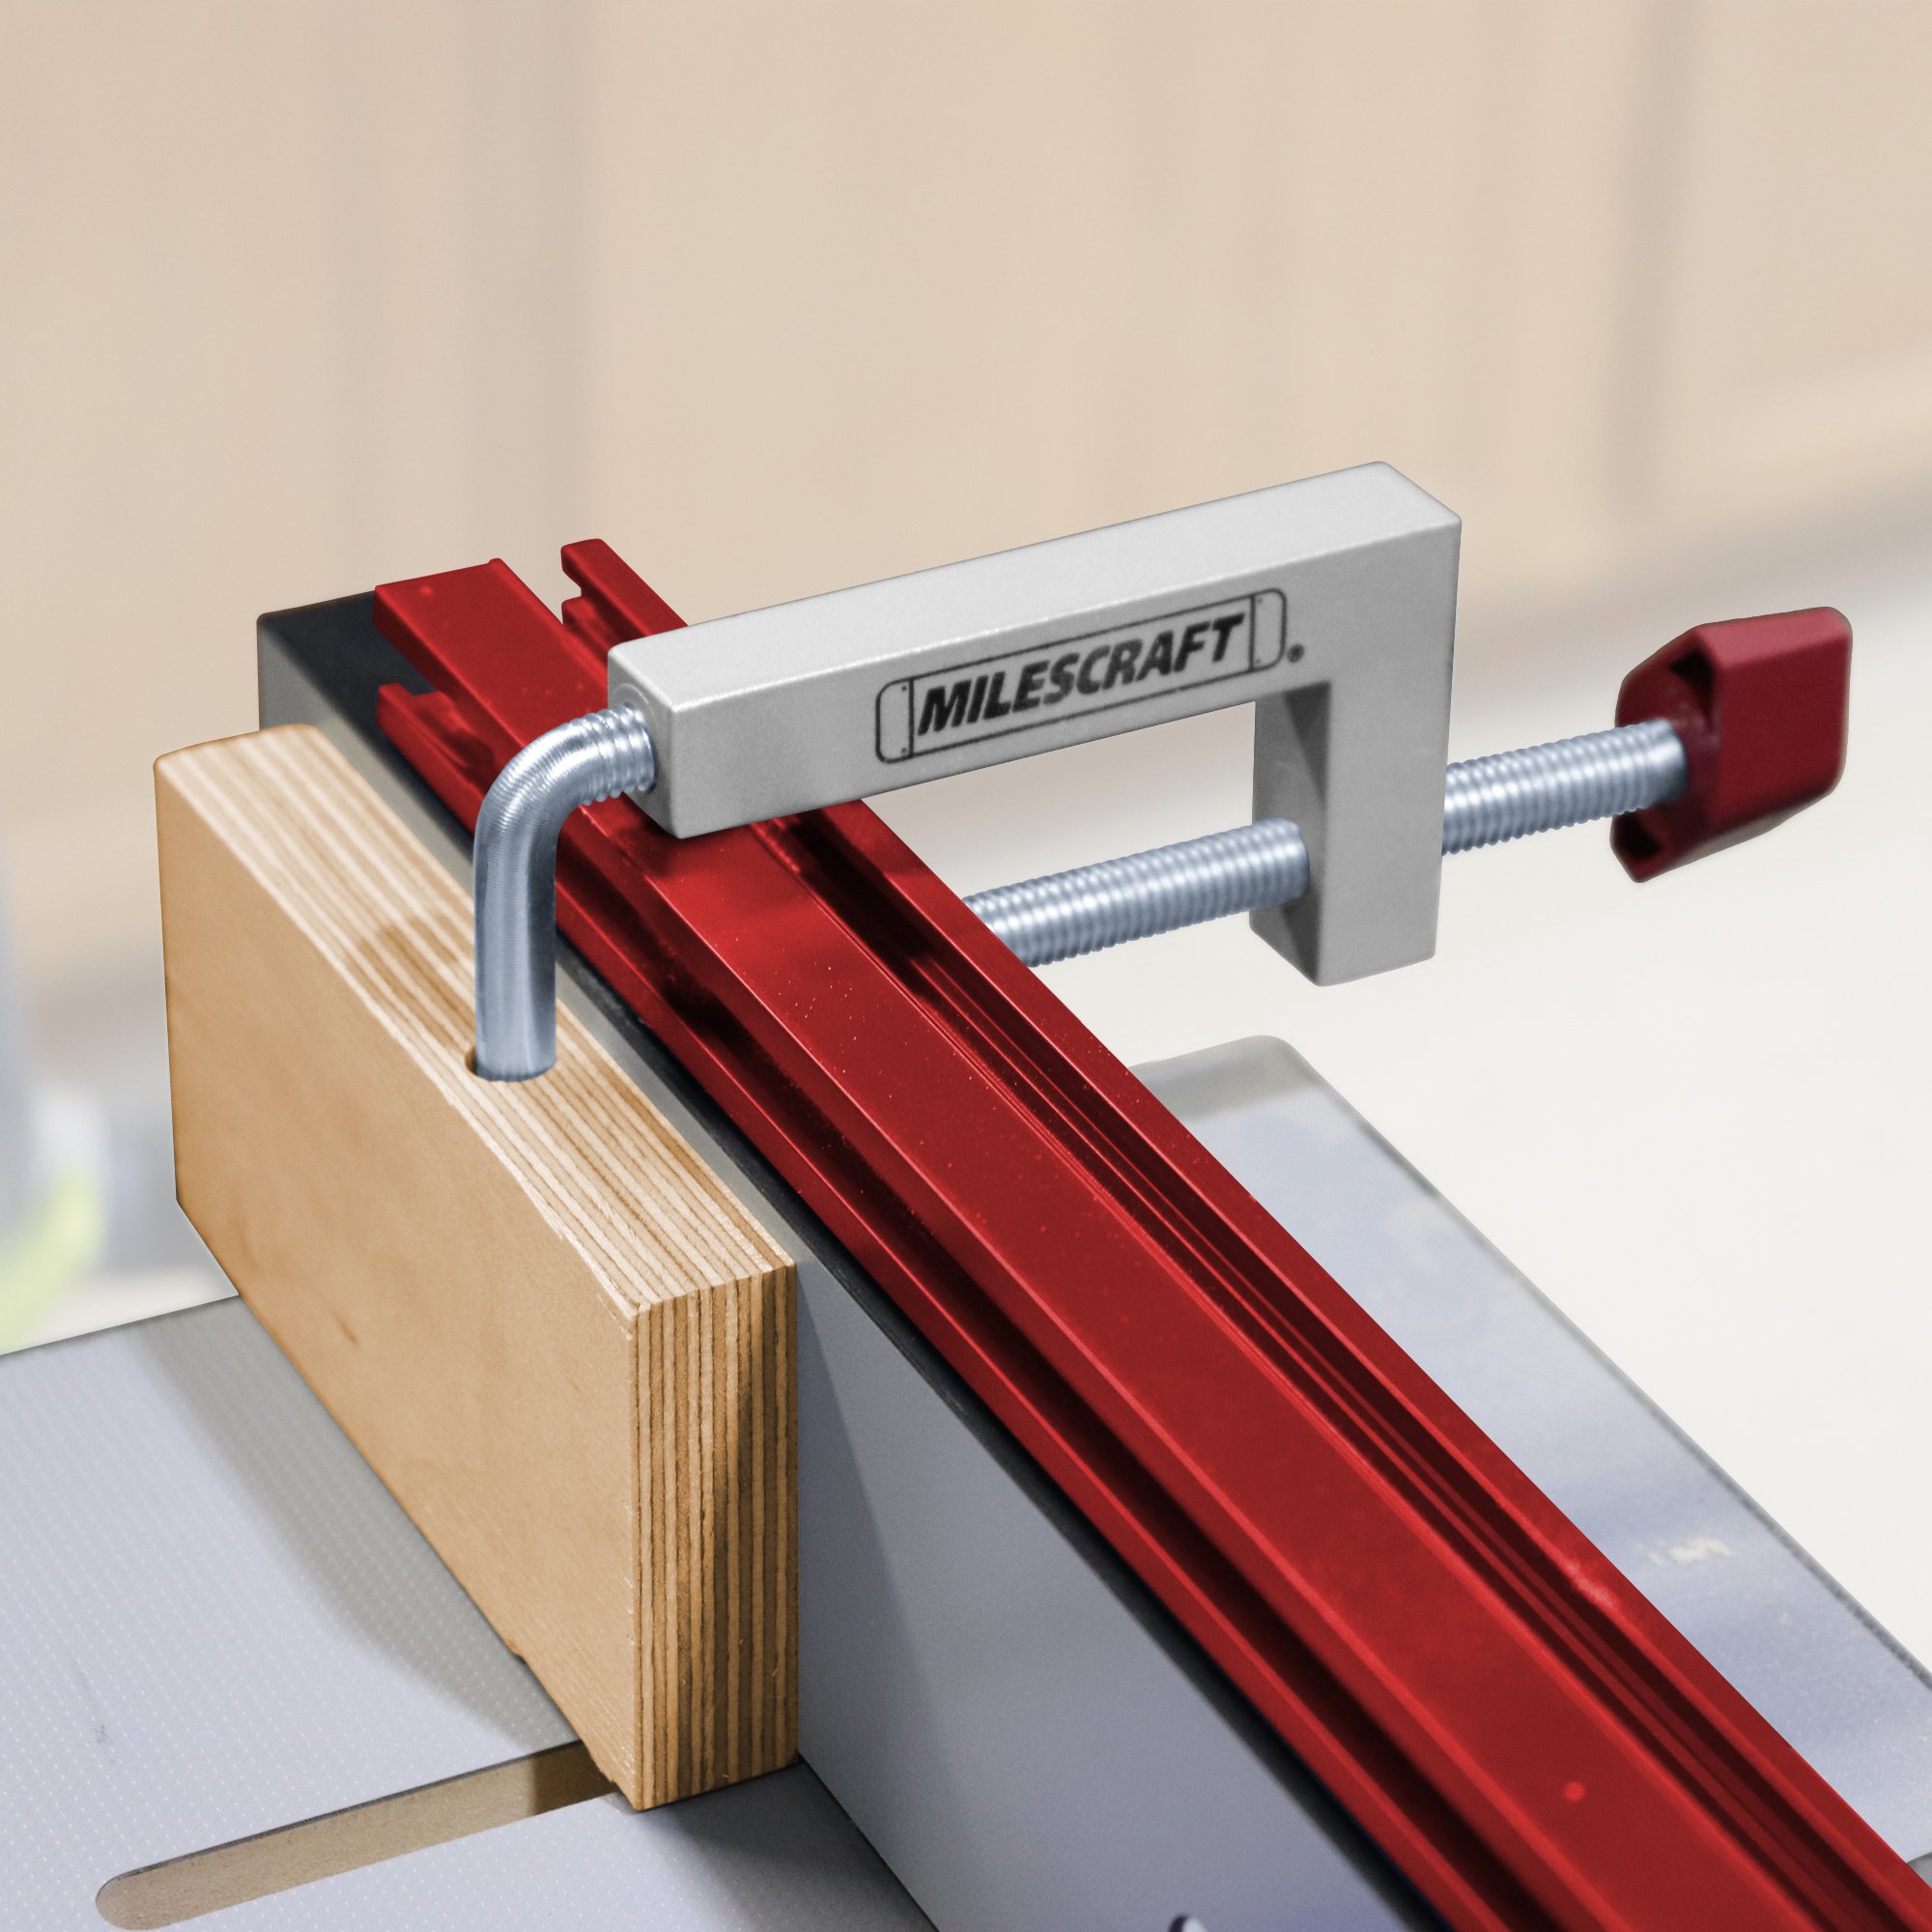 Milescraft 7350 Fence Clamp Kit 100-90° Corner Clamping Positioning/Assembly Squares and Fence Clamps. Works on Interior or Exterior Corners. Build Cabinets, Picture Frames, Shelving, and More (6pc)